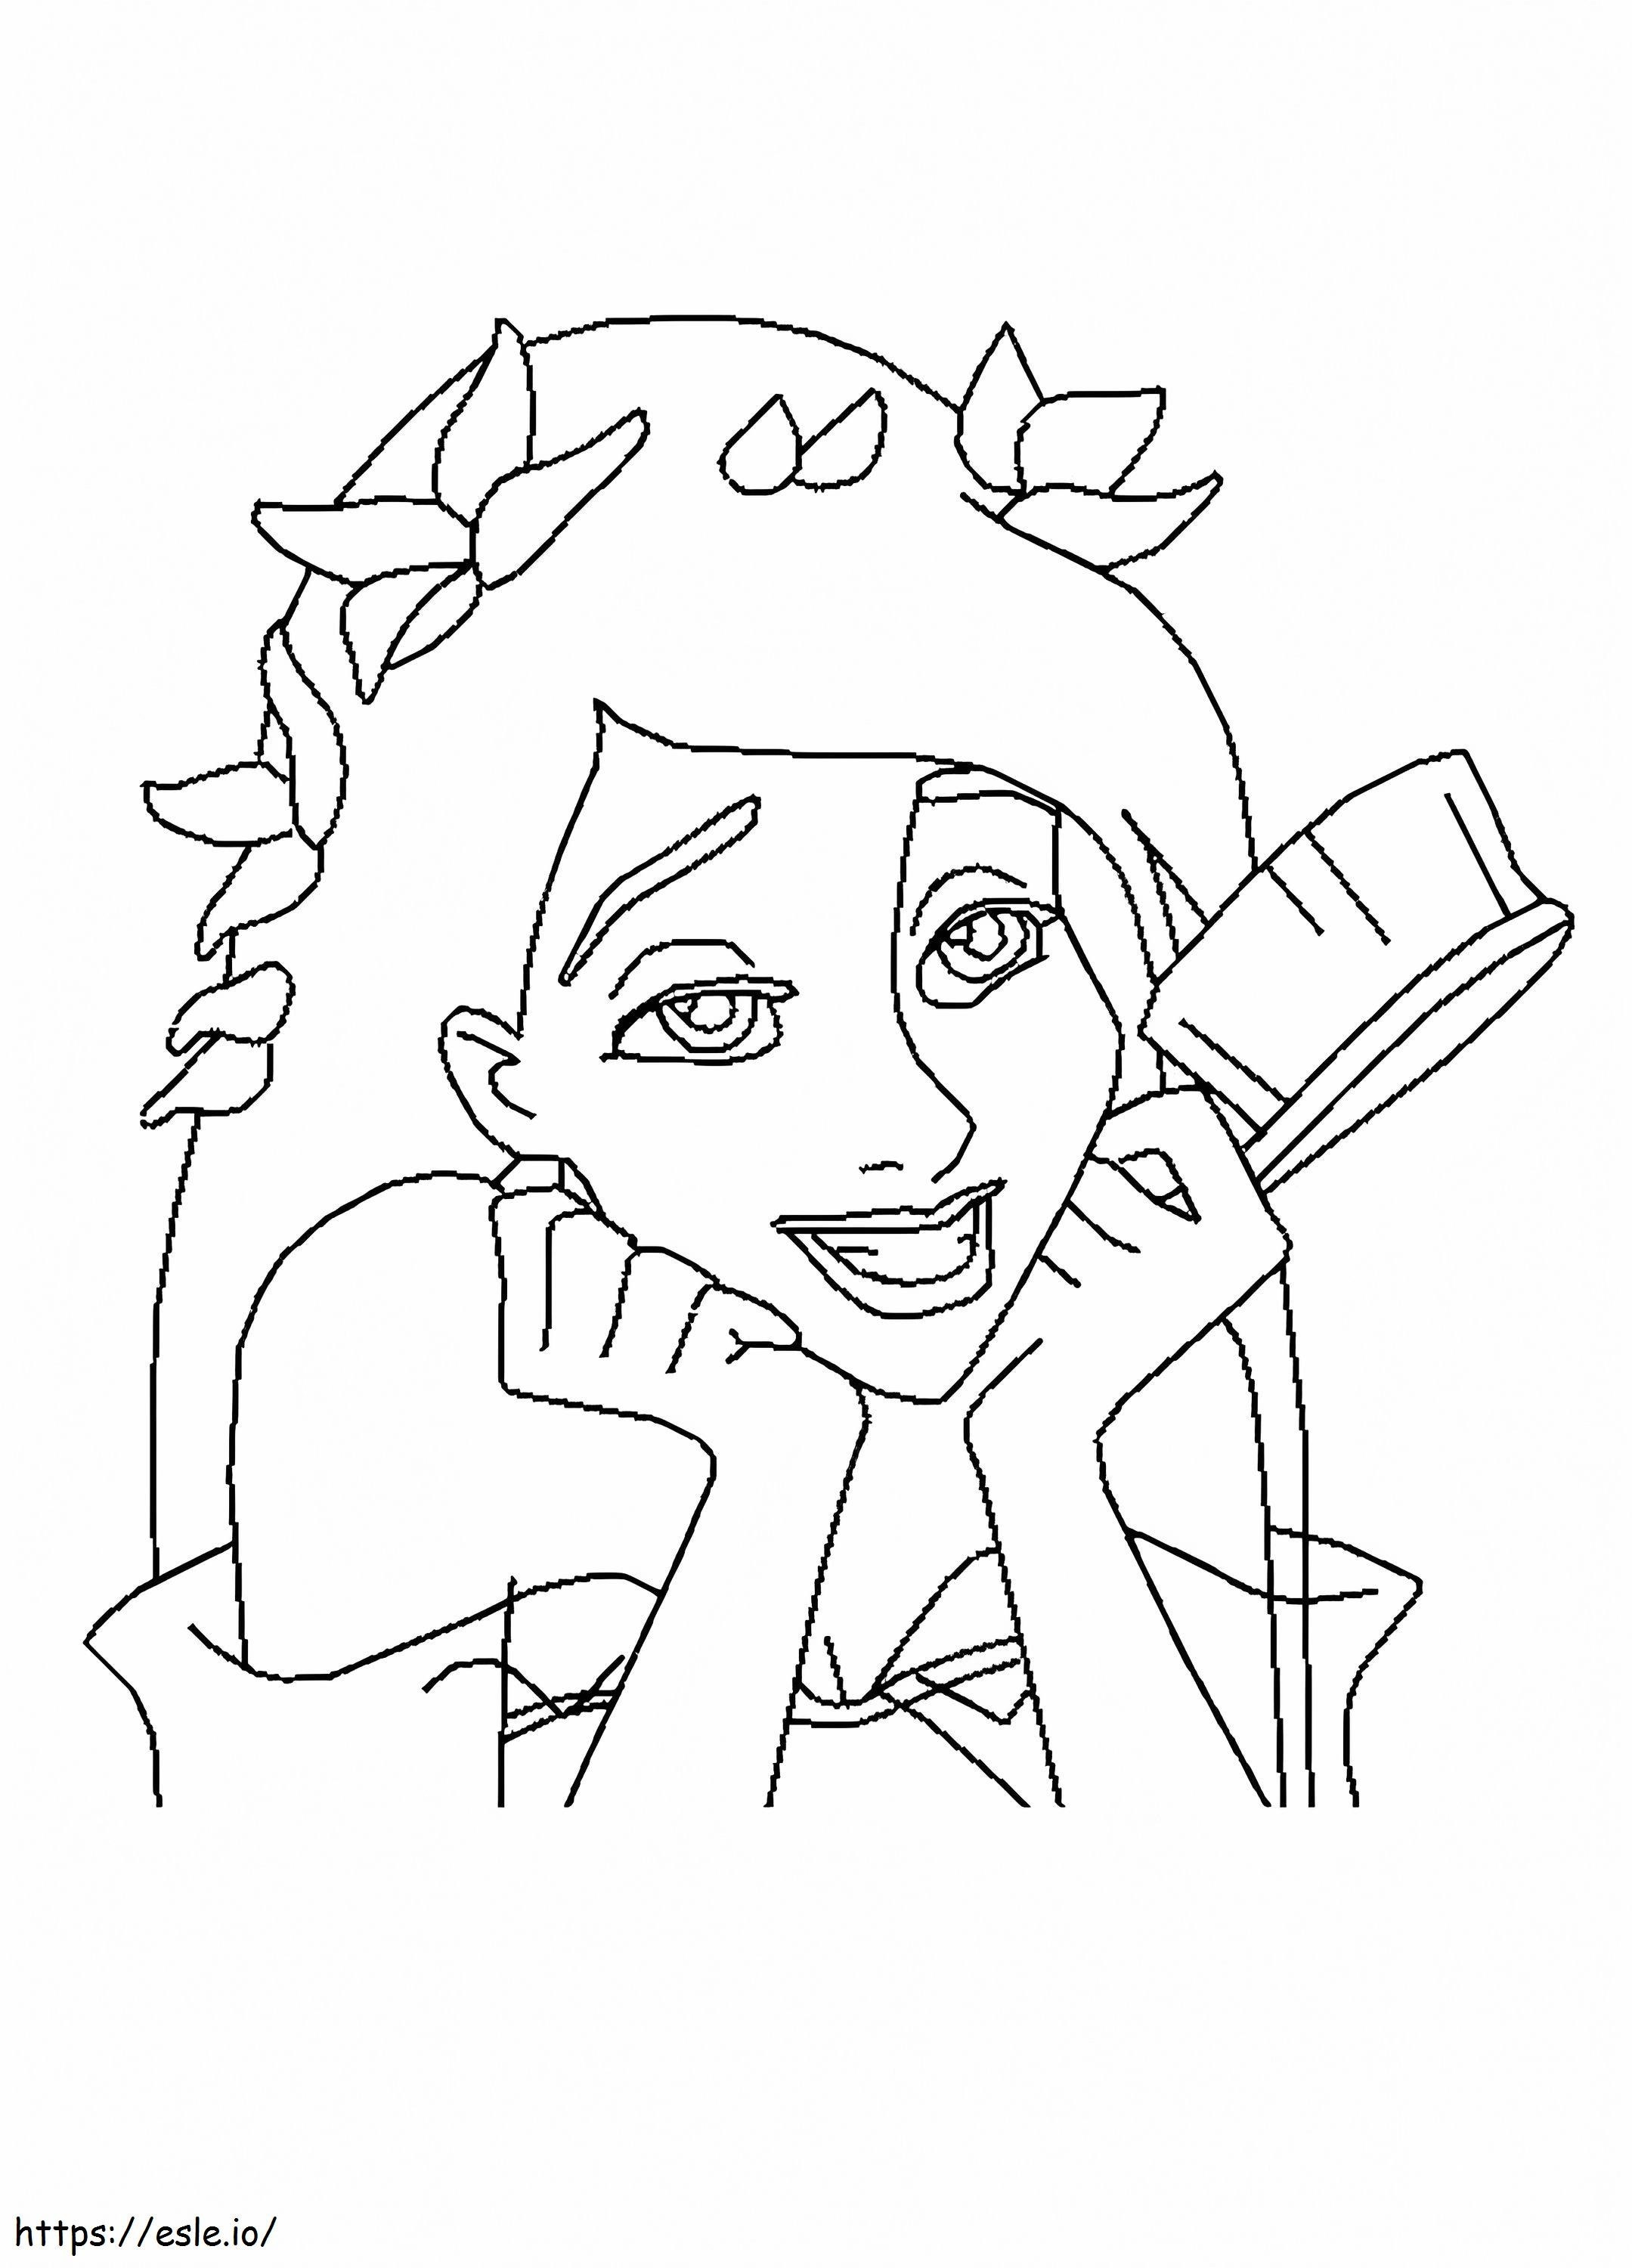 Love Giselle coloring page